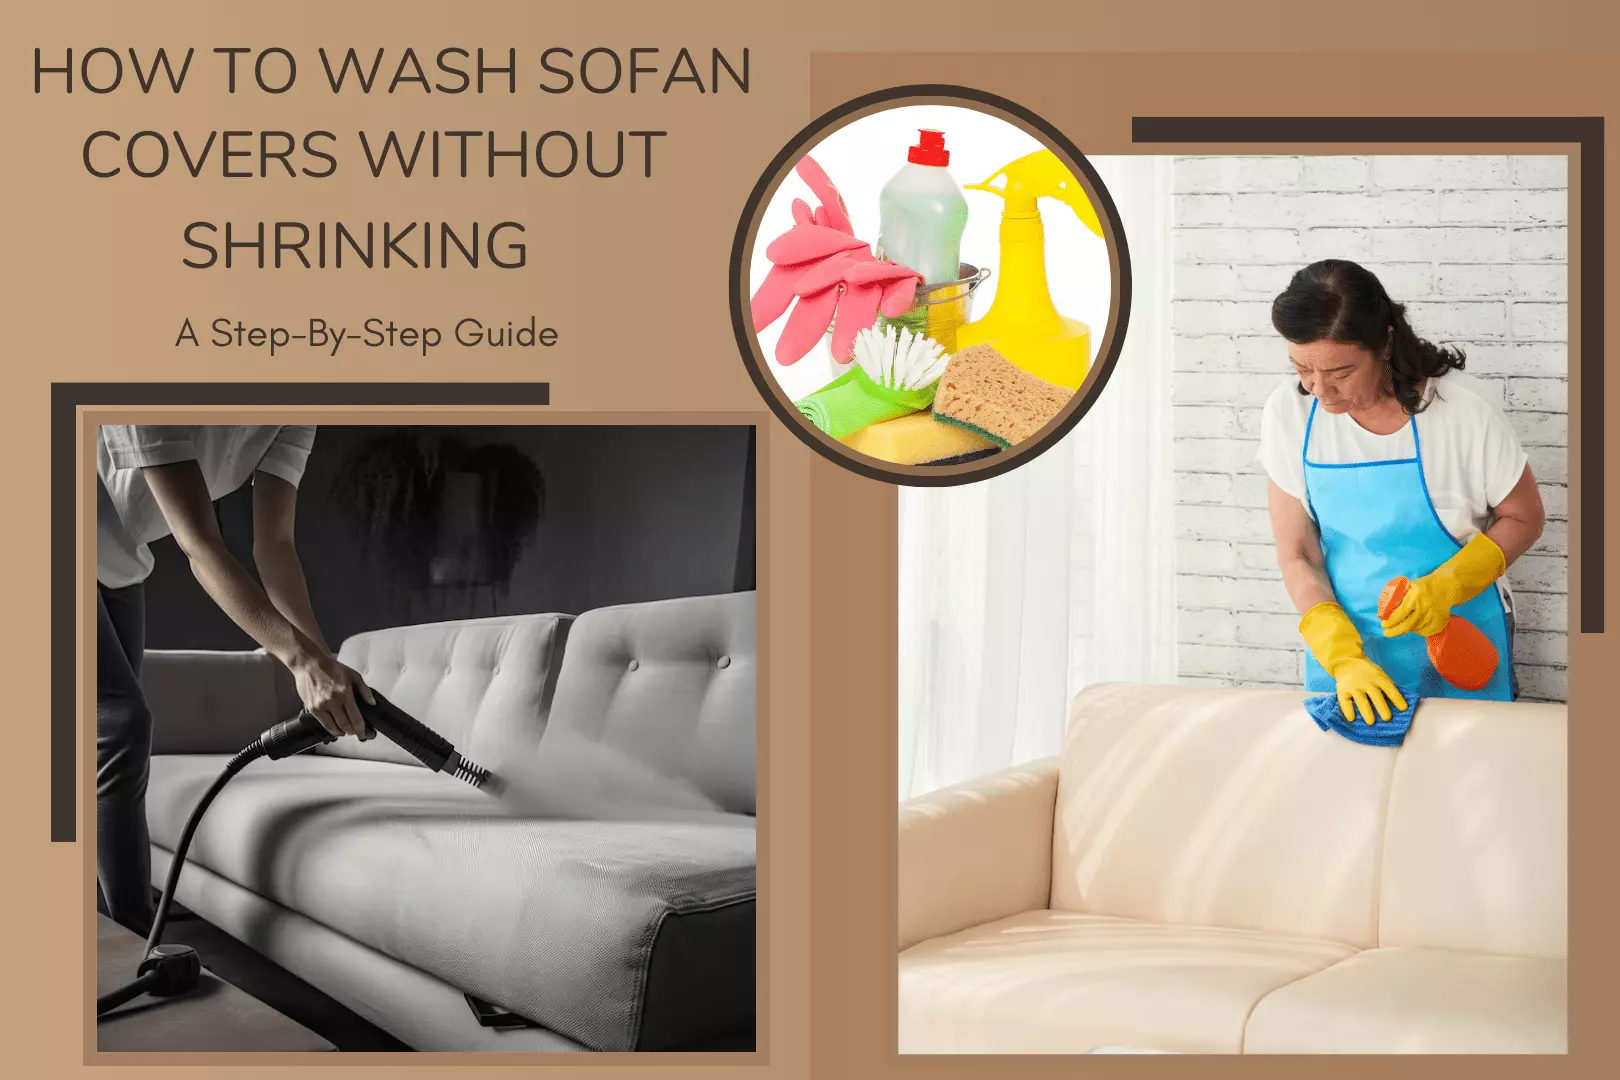 How to Wash Sofa Covers Without Shrinking: A Step-By-Step Guide